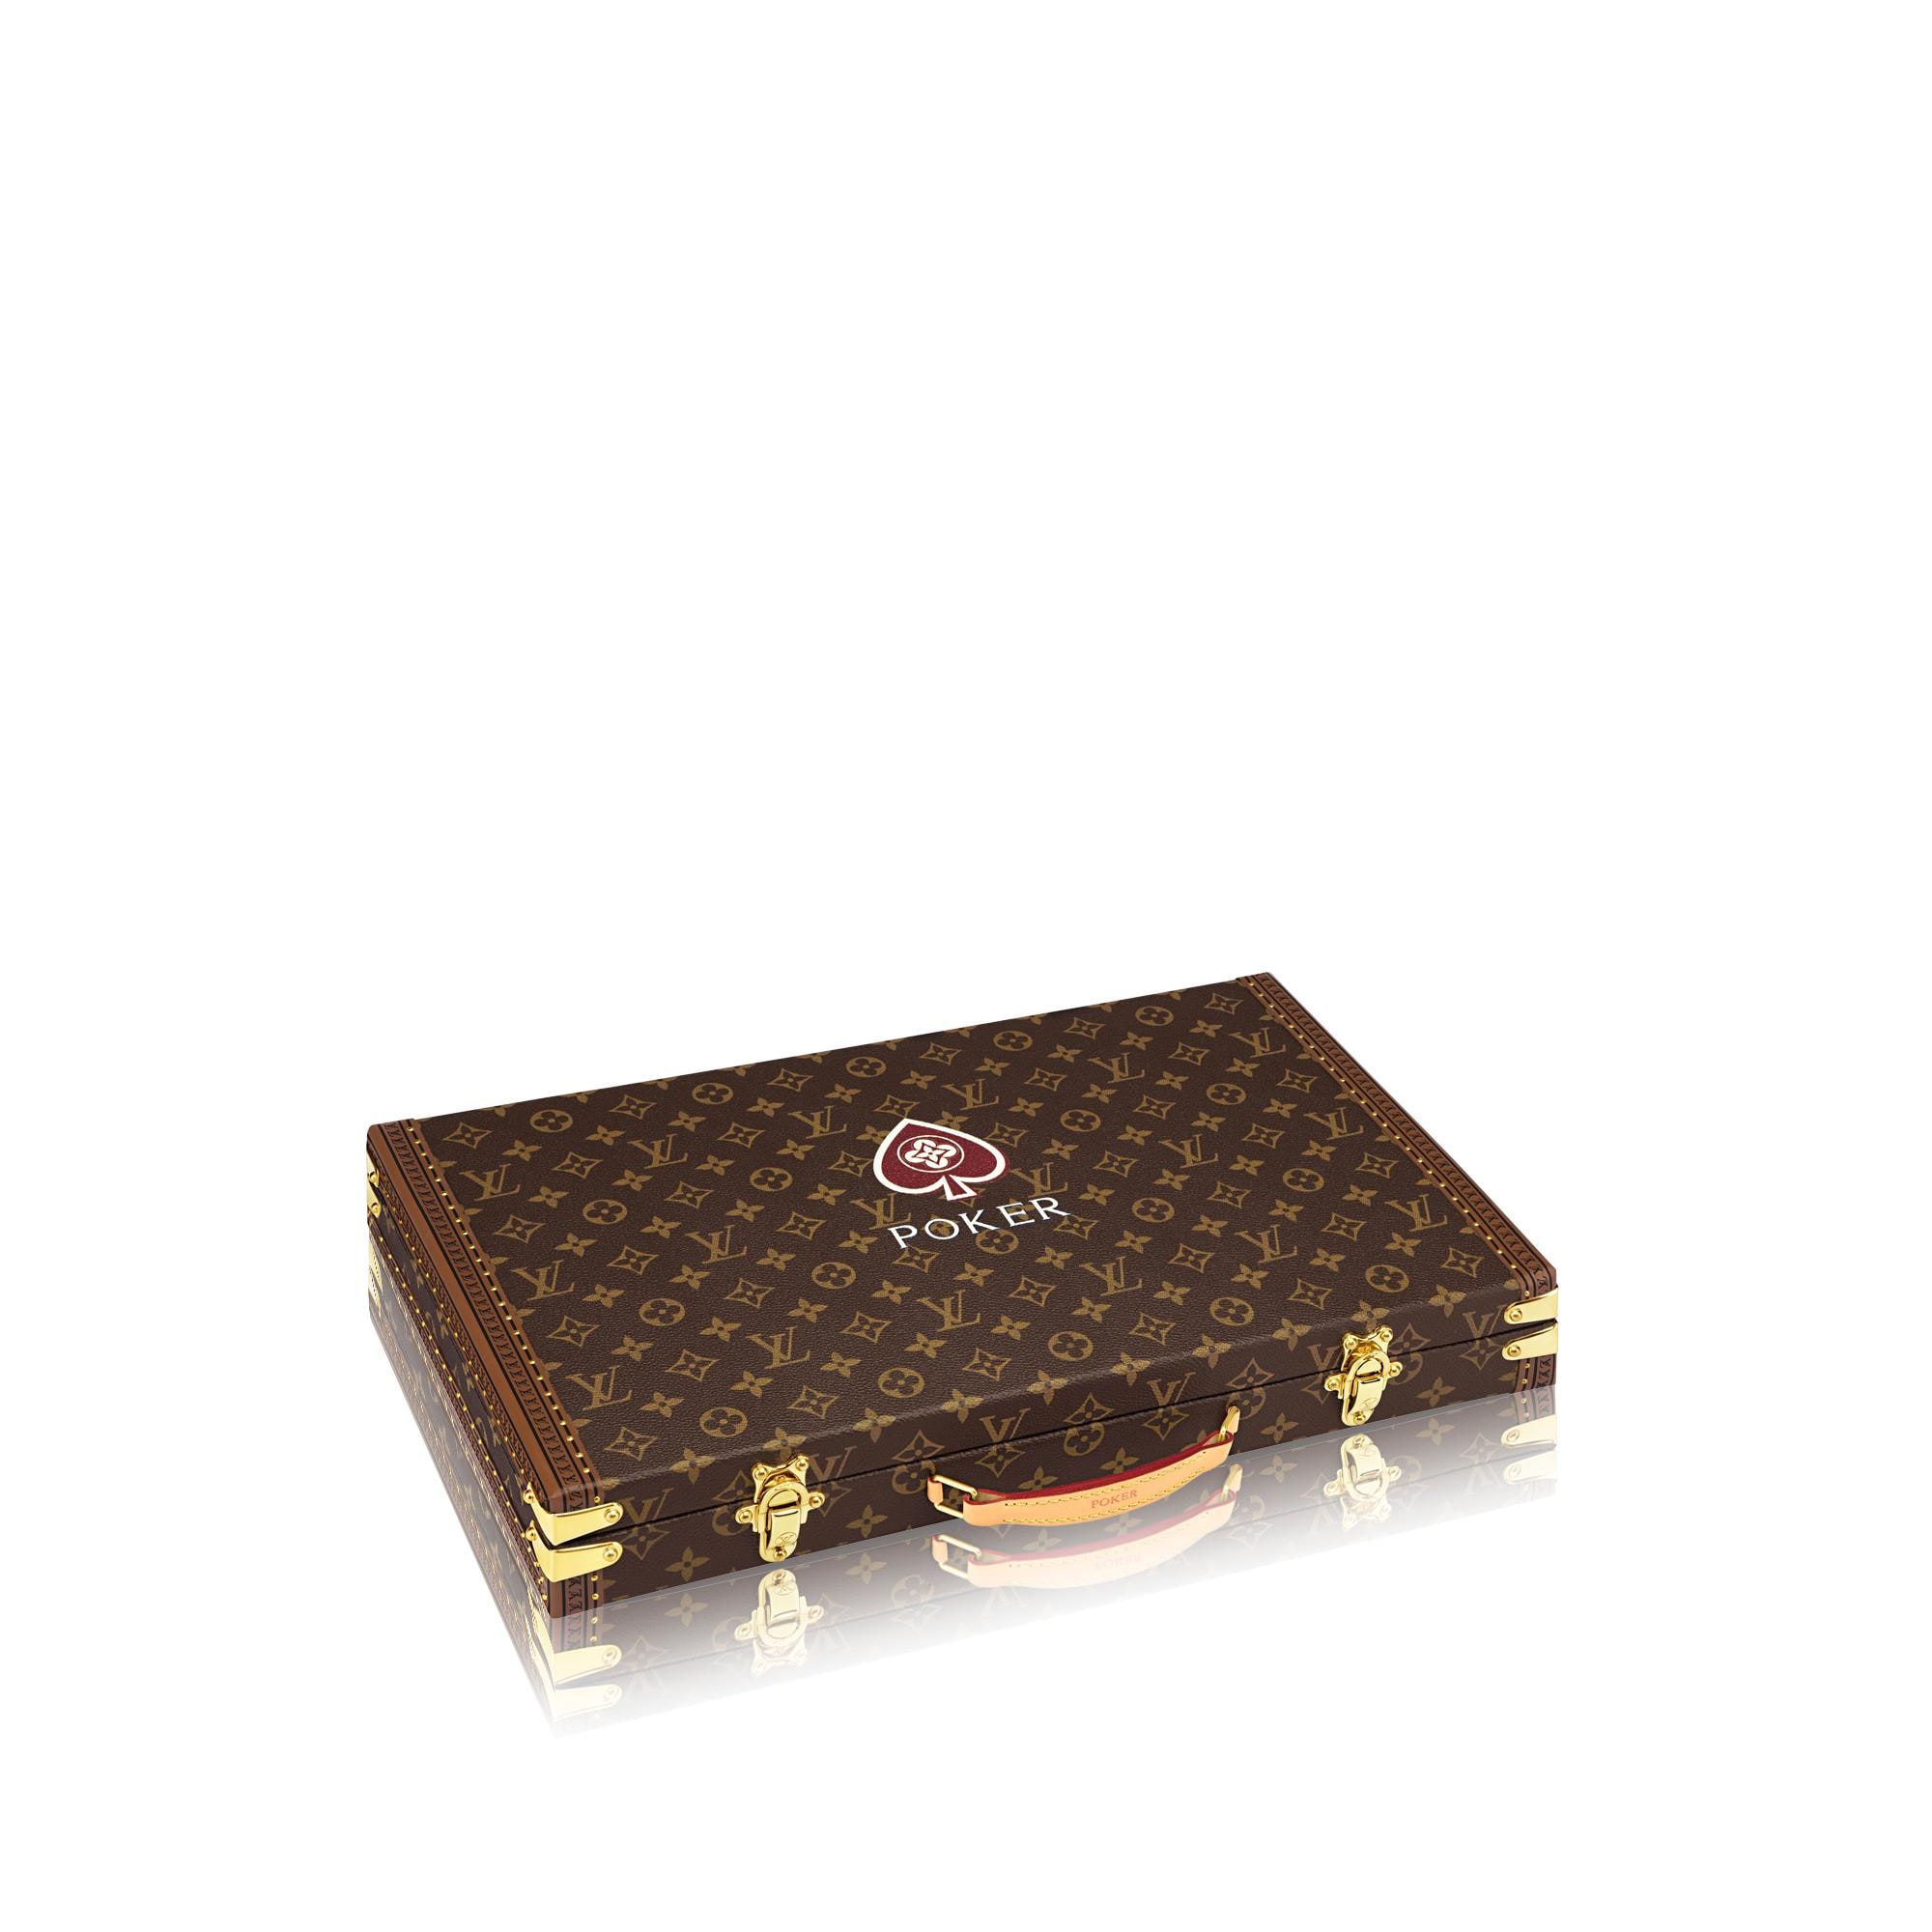 The Louis Vuitton Poker Set Can Now Be Yours For $32,500